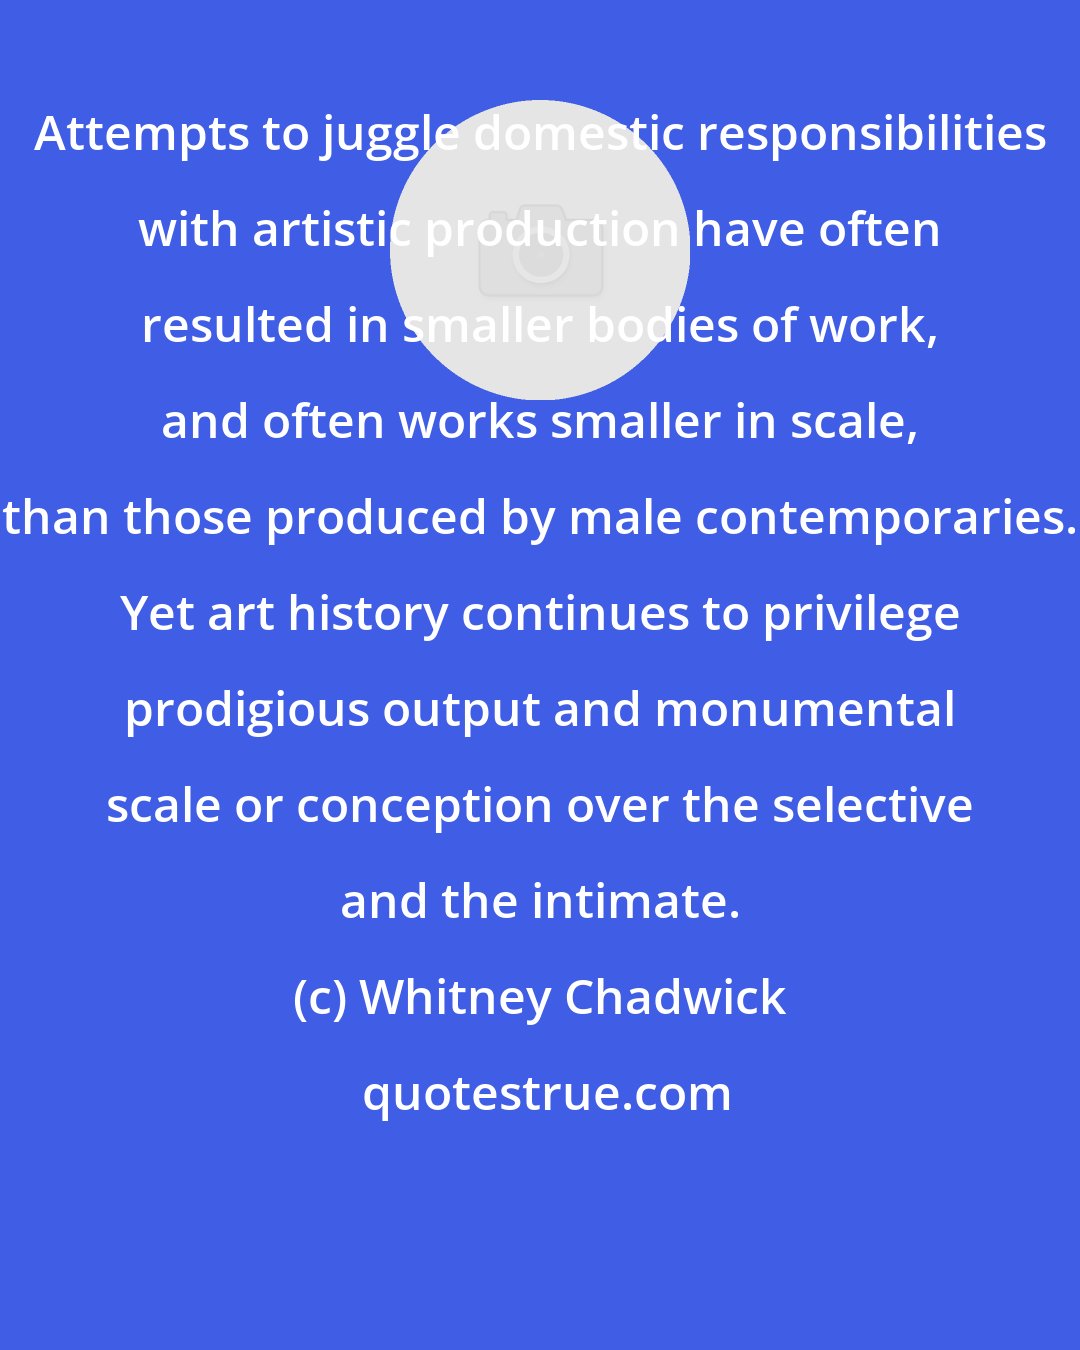 Whitney Chadwick: Attempts to juggle domestic responsibilities with artistic production have often resulted in smaller bodies of work, and often works smaller in scale, than those produced by male contemporaries. Yet art history continues to privilege prodigious output and monumental scale or conception over the selective and the intimate.